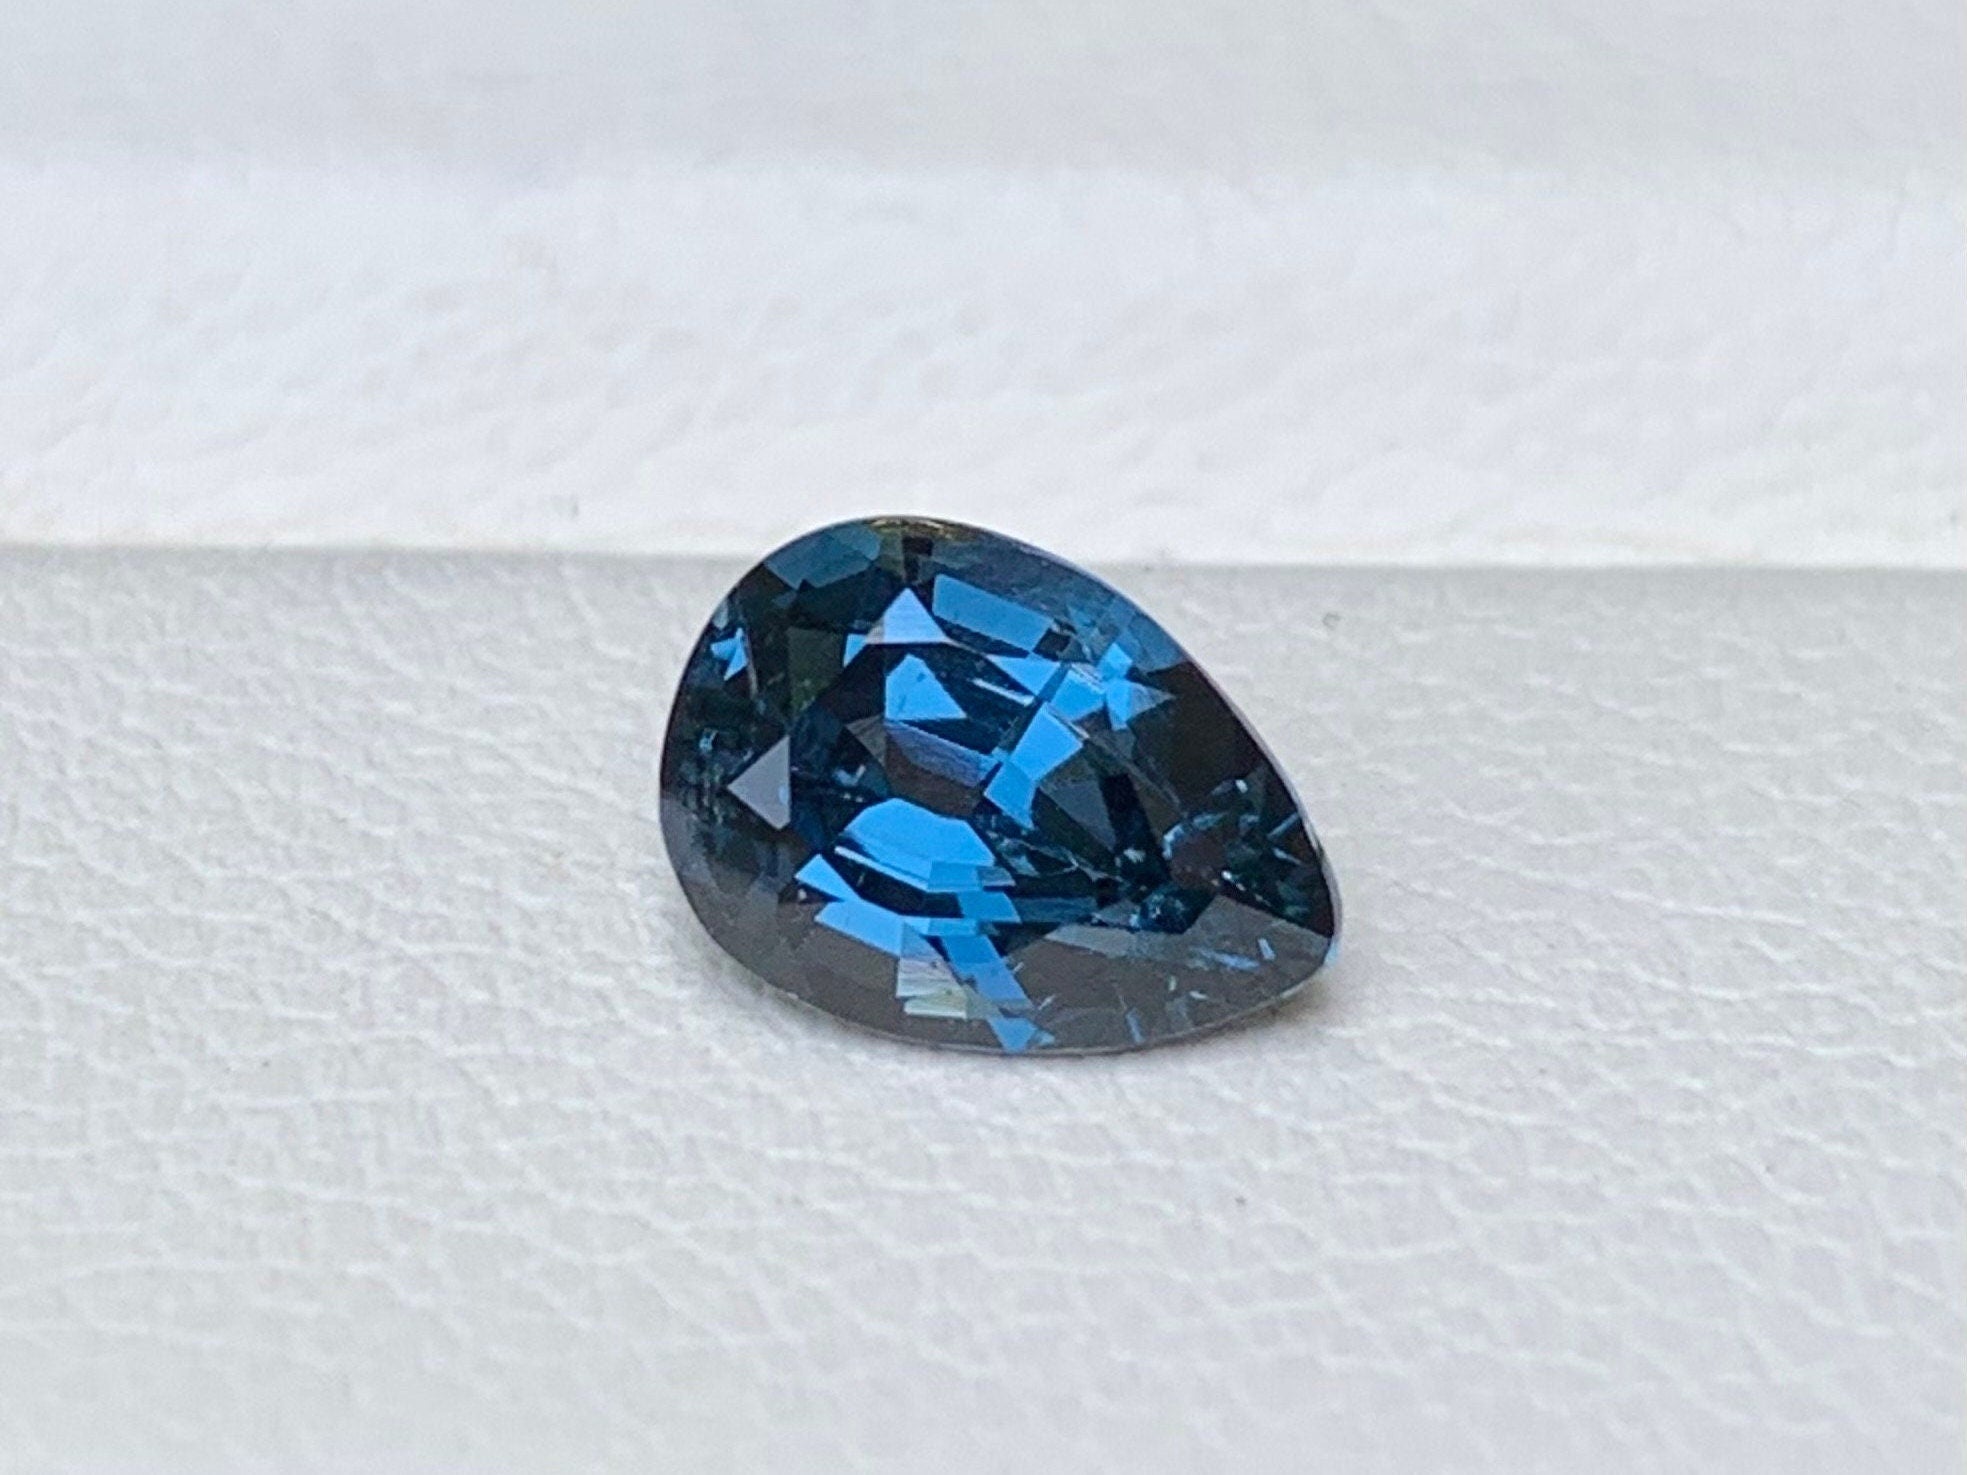 RARE Blue Spinel 1.44 Cts, Blue Cobalt Spinal, Unheated Blue Spinal, Natural Blue Spinal Gemstone Gift, Blue Gemstone For Jewelry Making